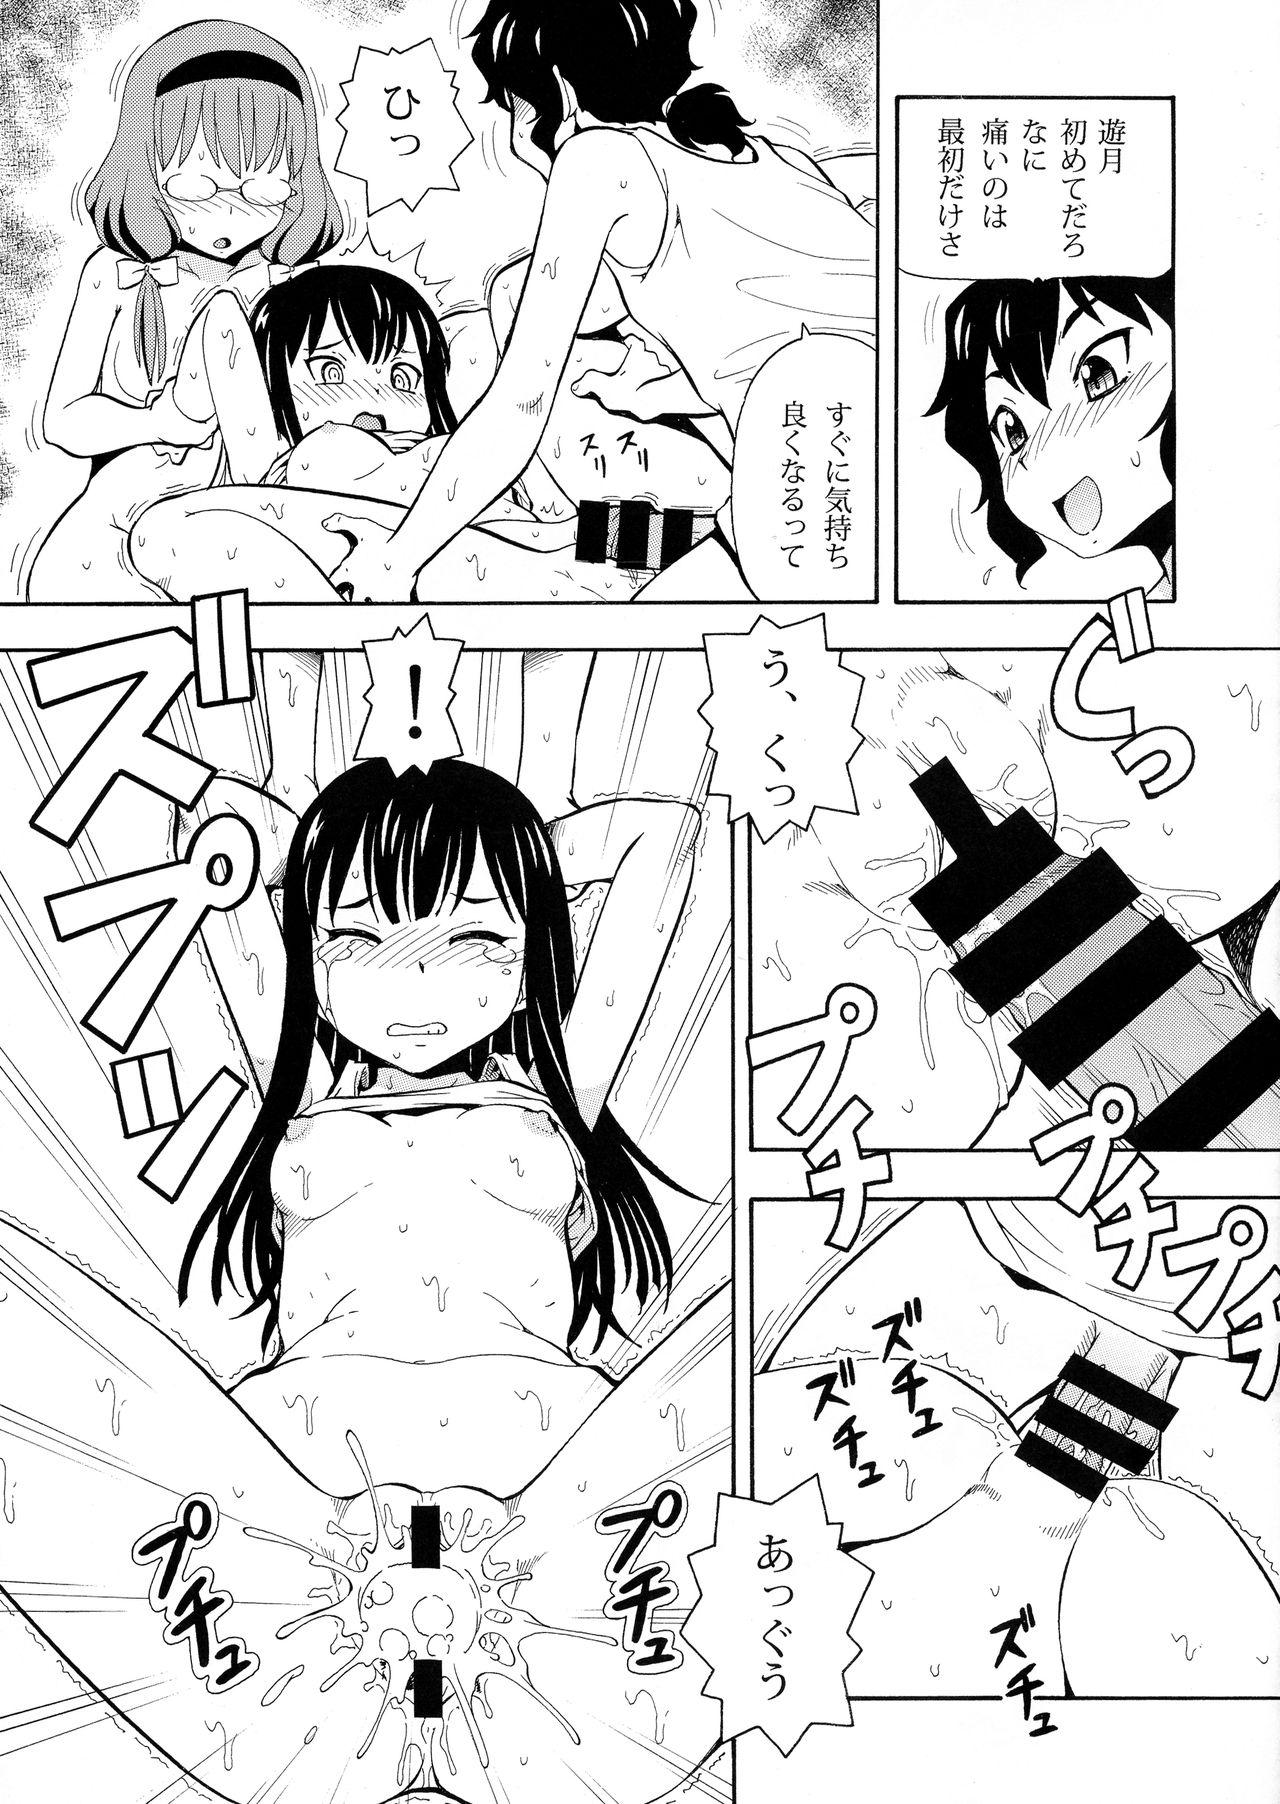 Fucked Hard selector EROXOSS - Selector infected wixoss Sapphic - Page 11